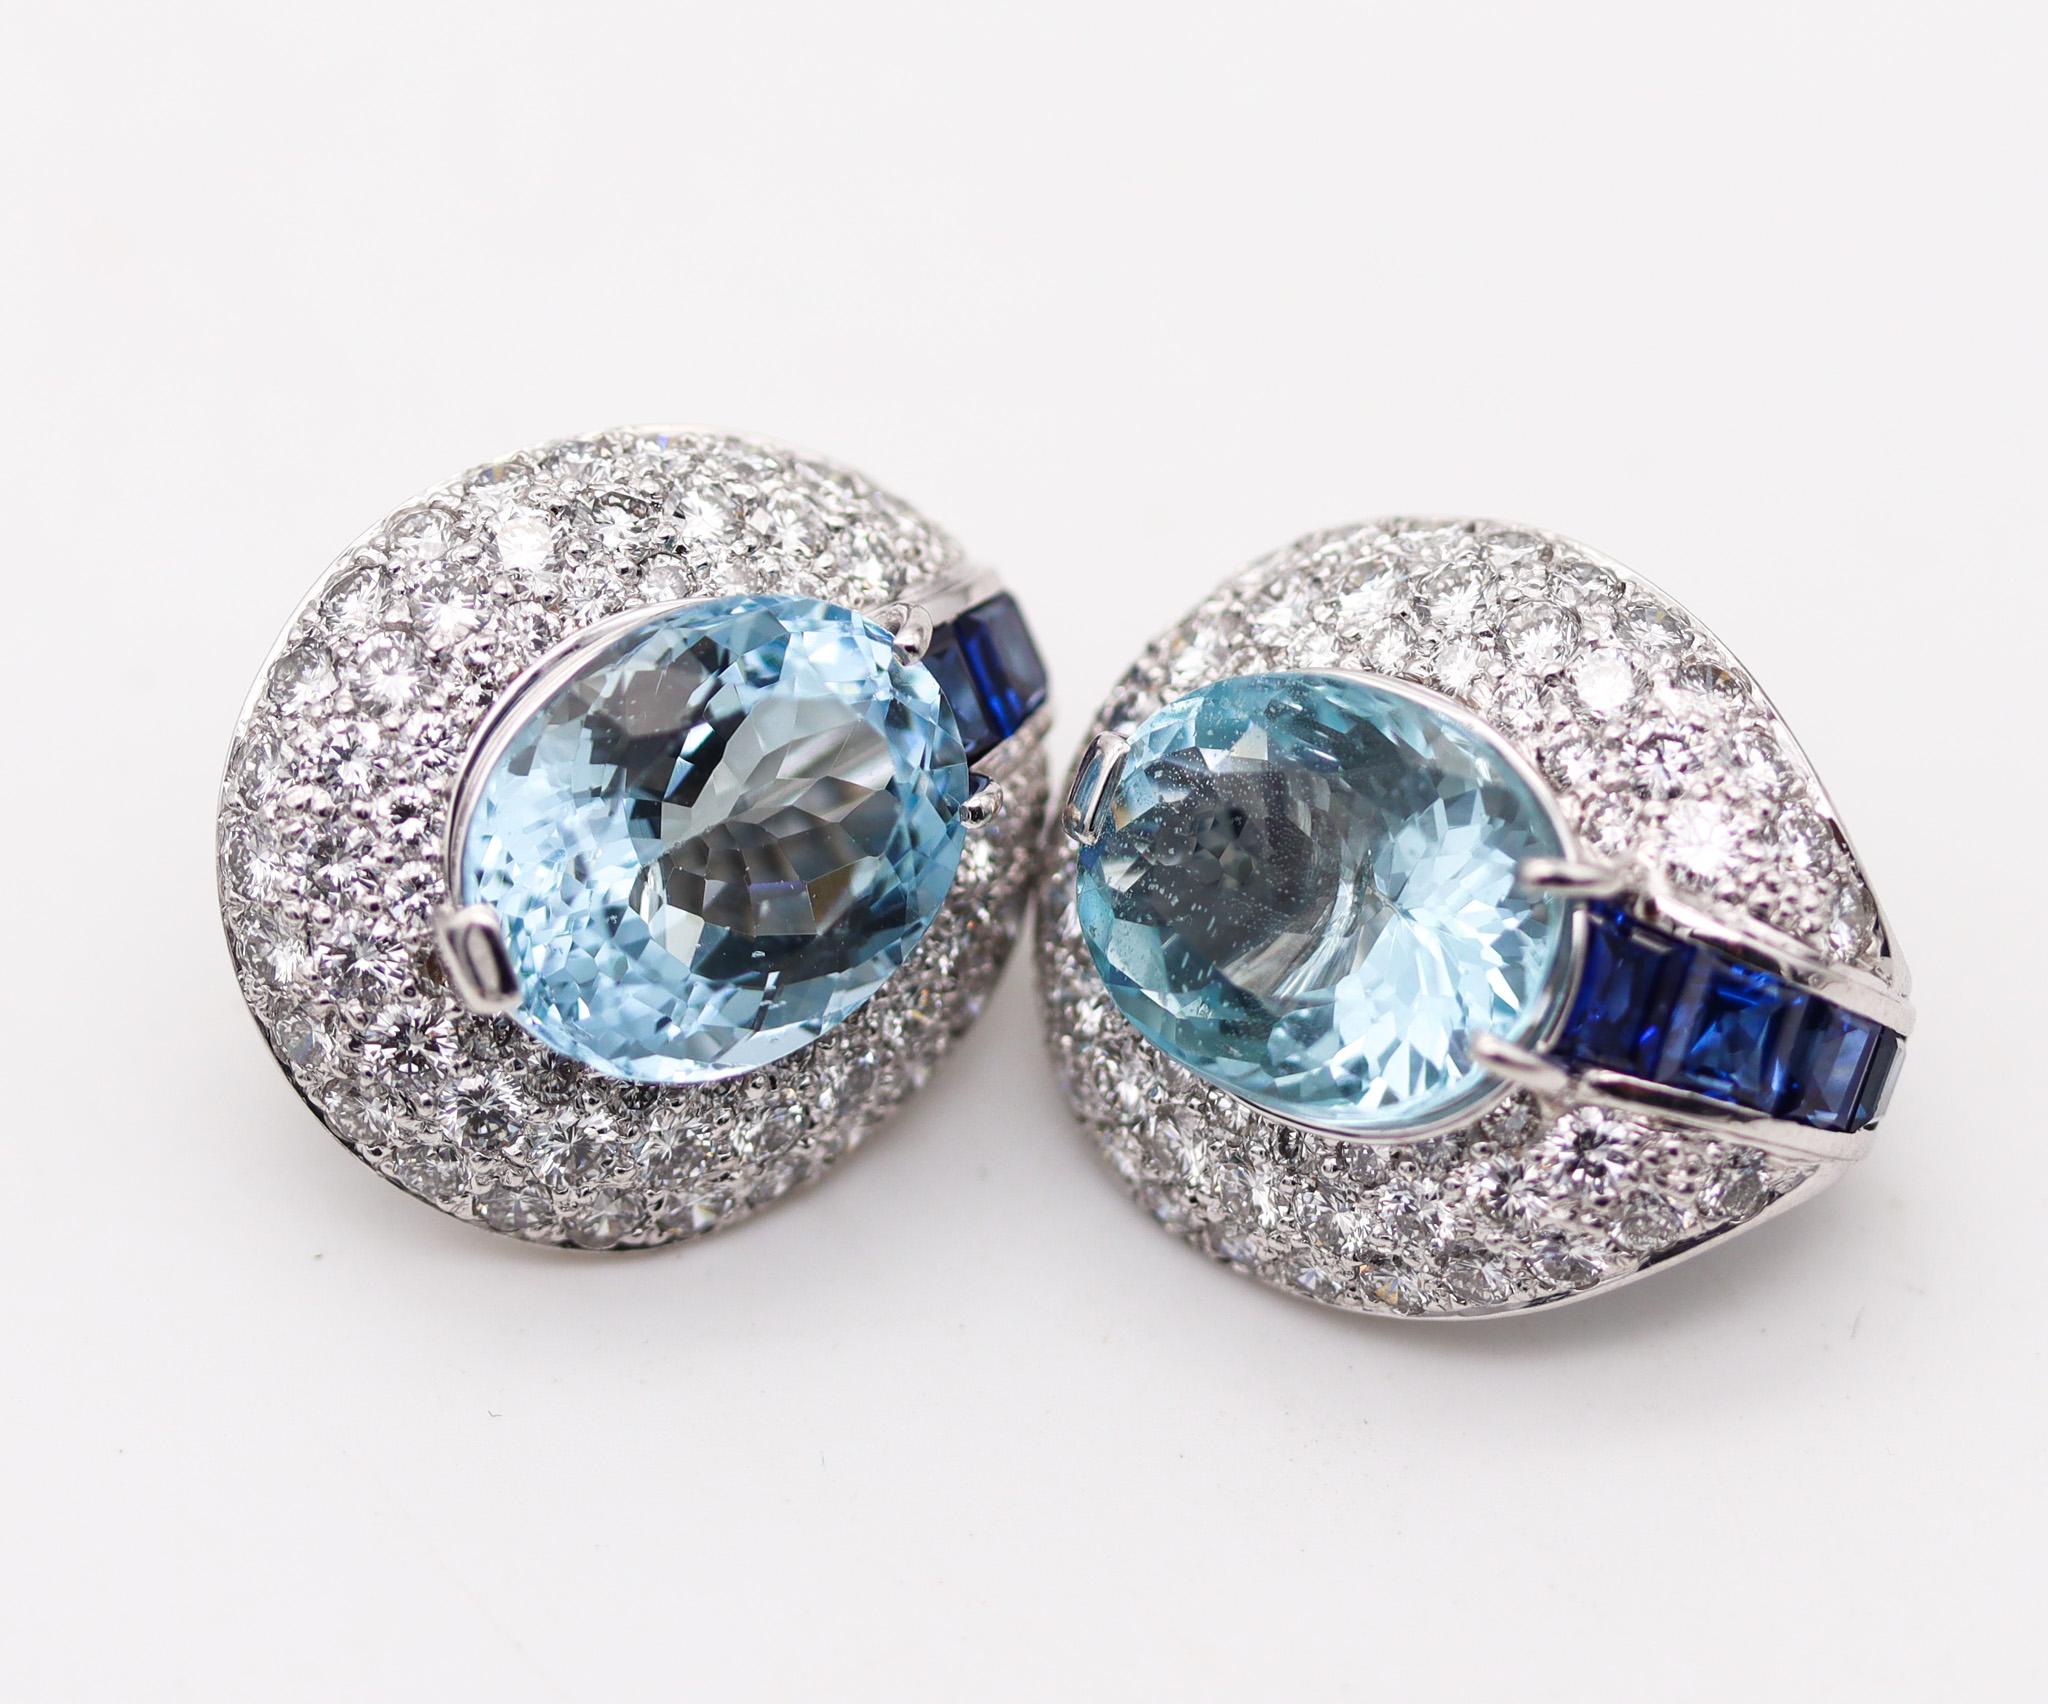 Hemmerle Munich Platinum Earrings With 30.58 Ctw Aquamarines Diamonds Sapphires In Excellent Condition For Sale In Miami, FL